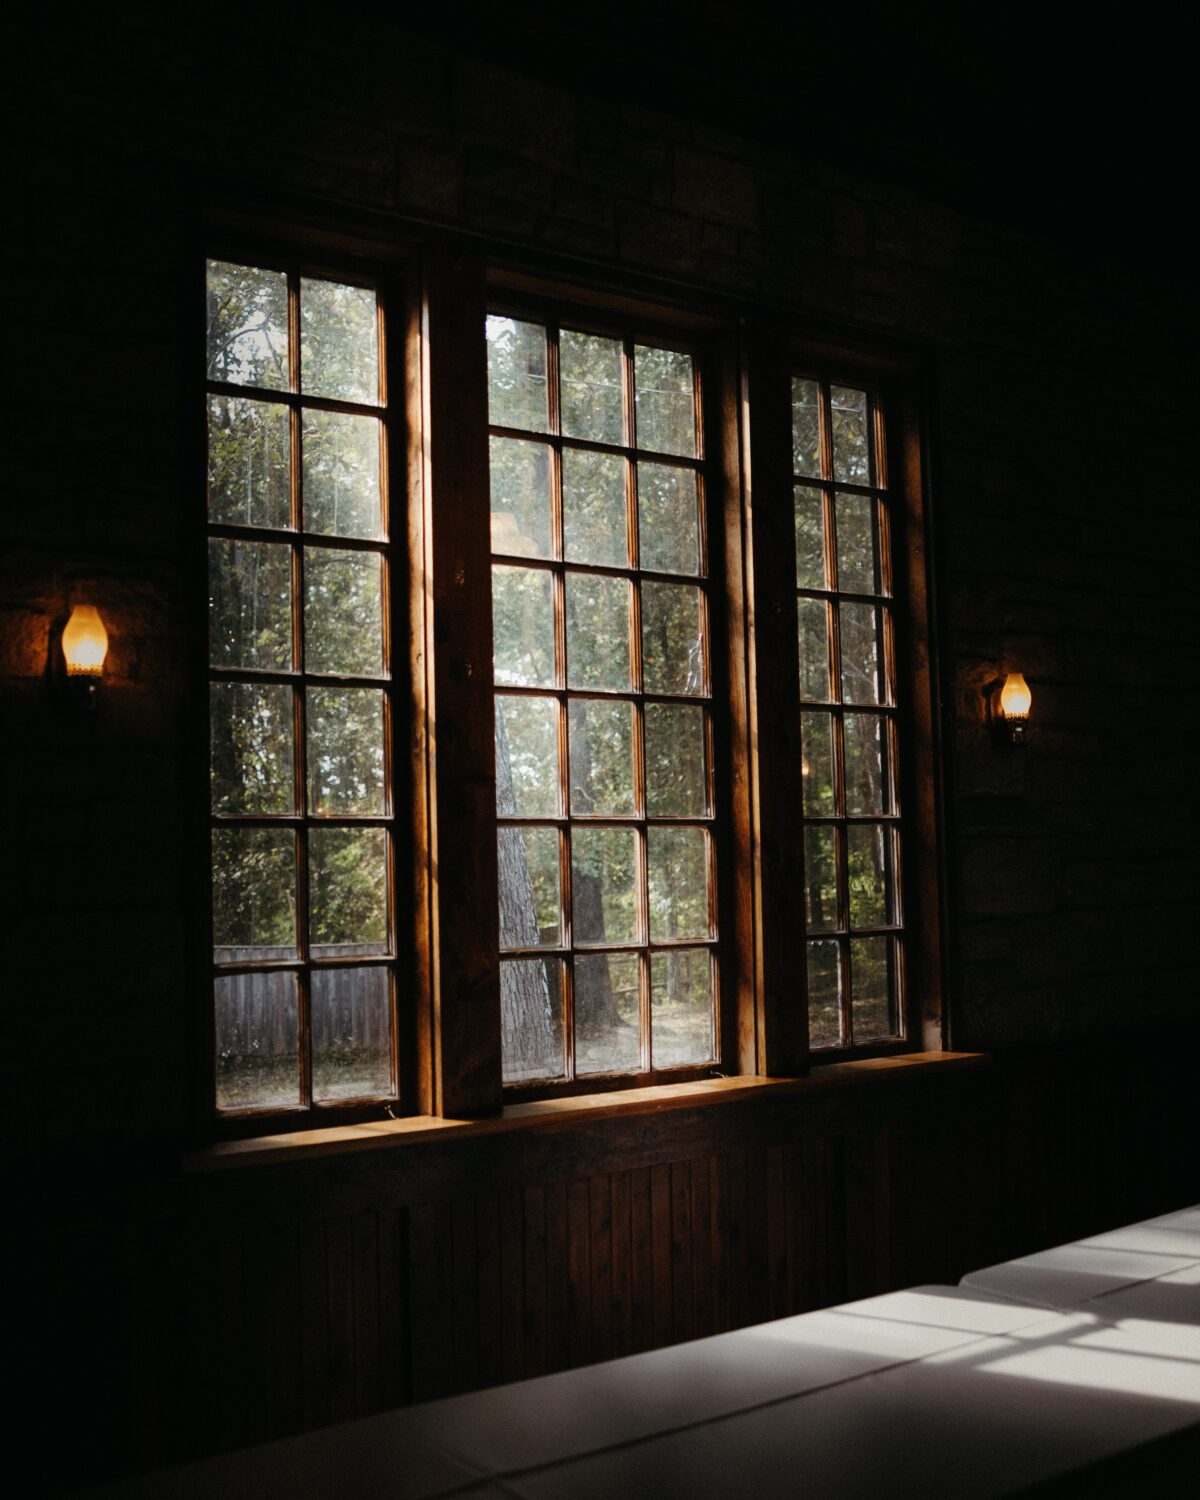 A window in Assembly Hall at Cedars of Lebanon State Park.